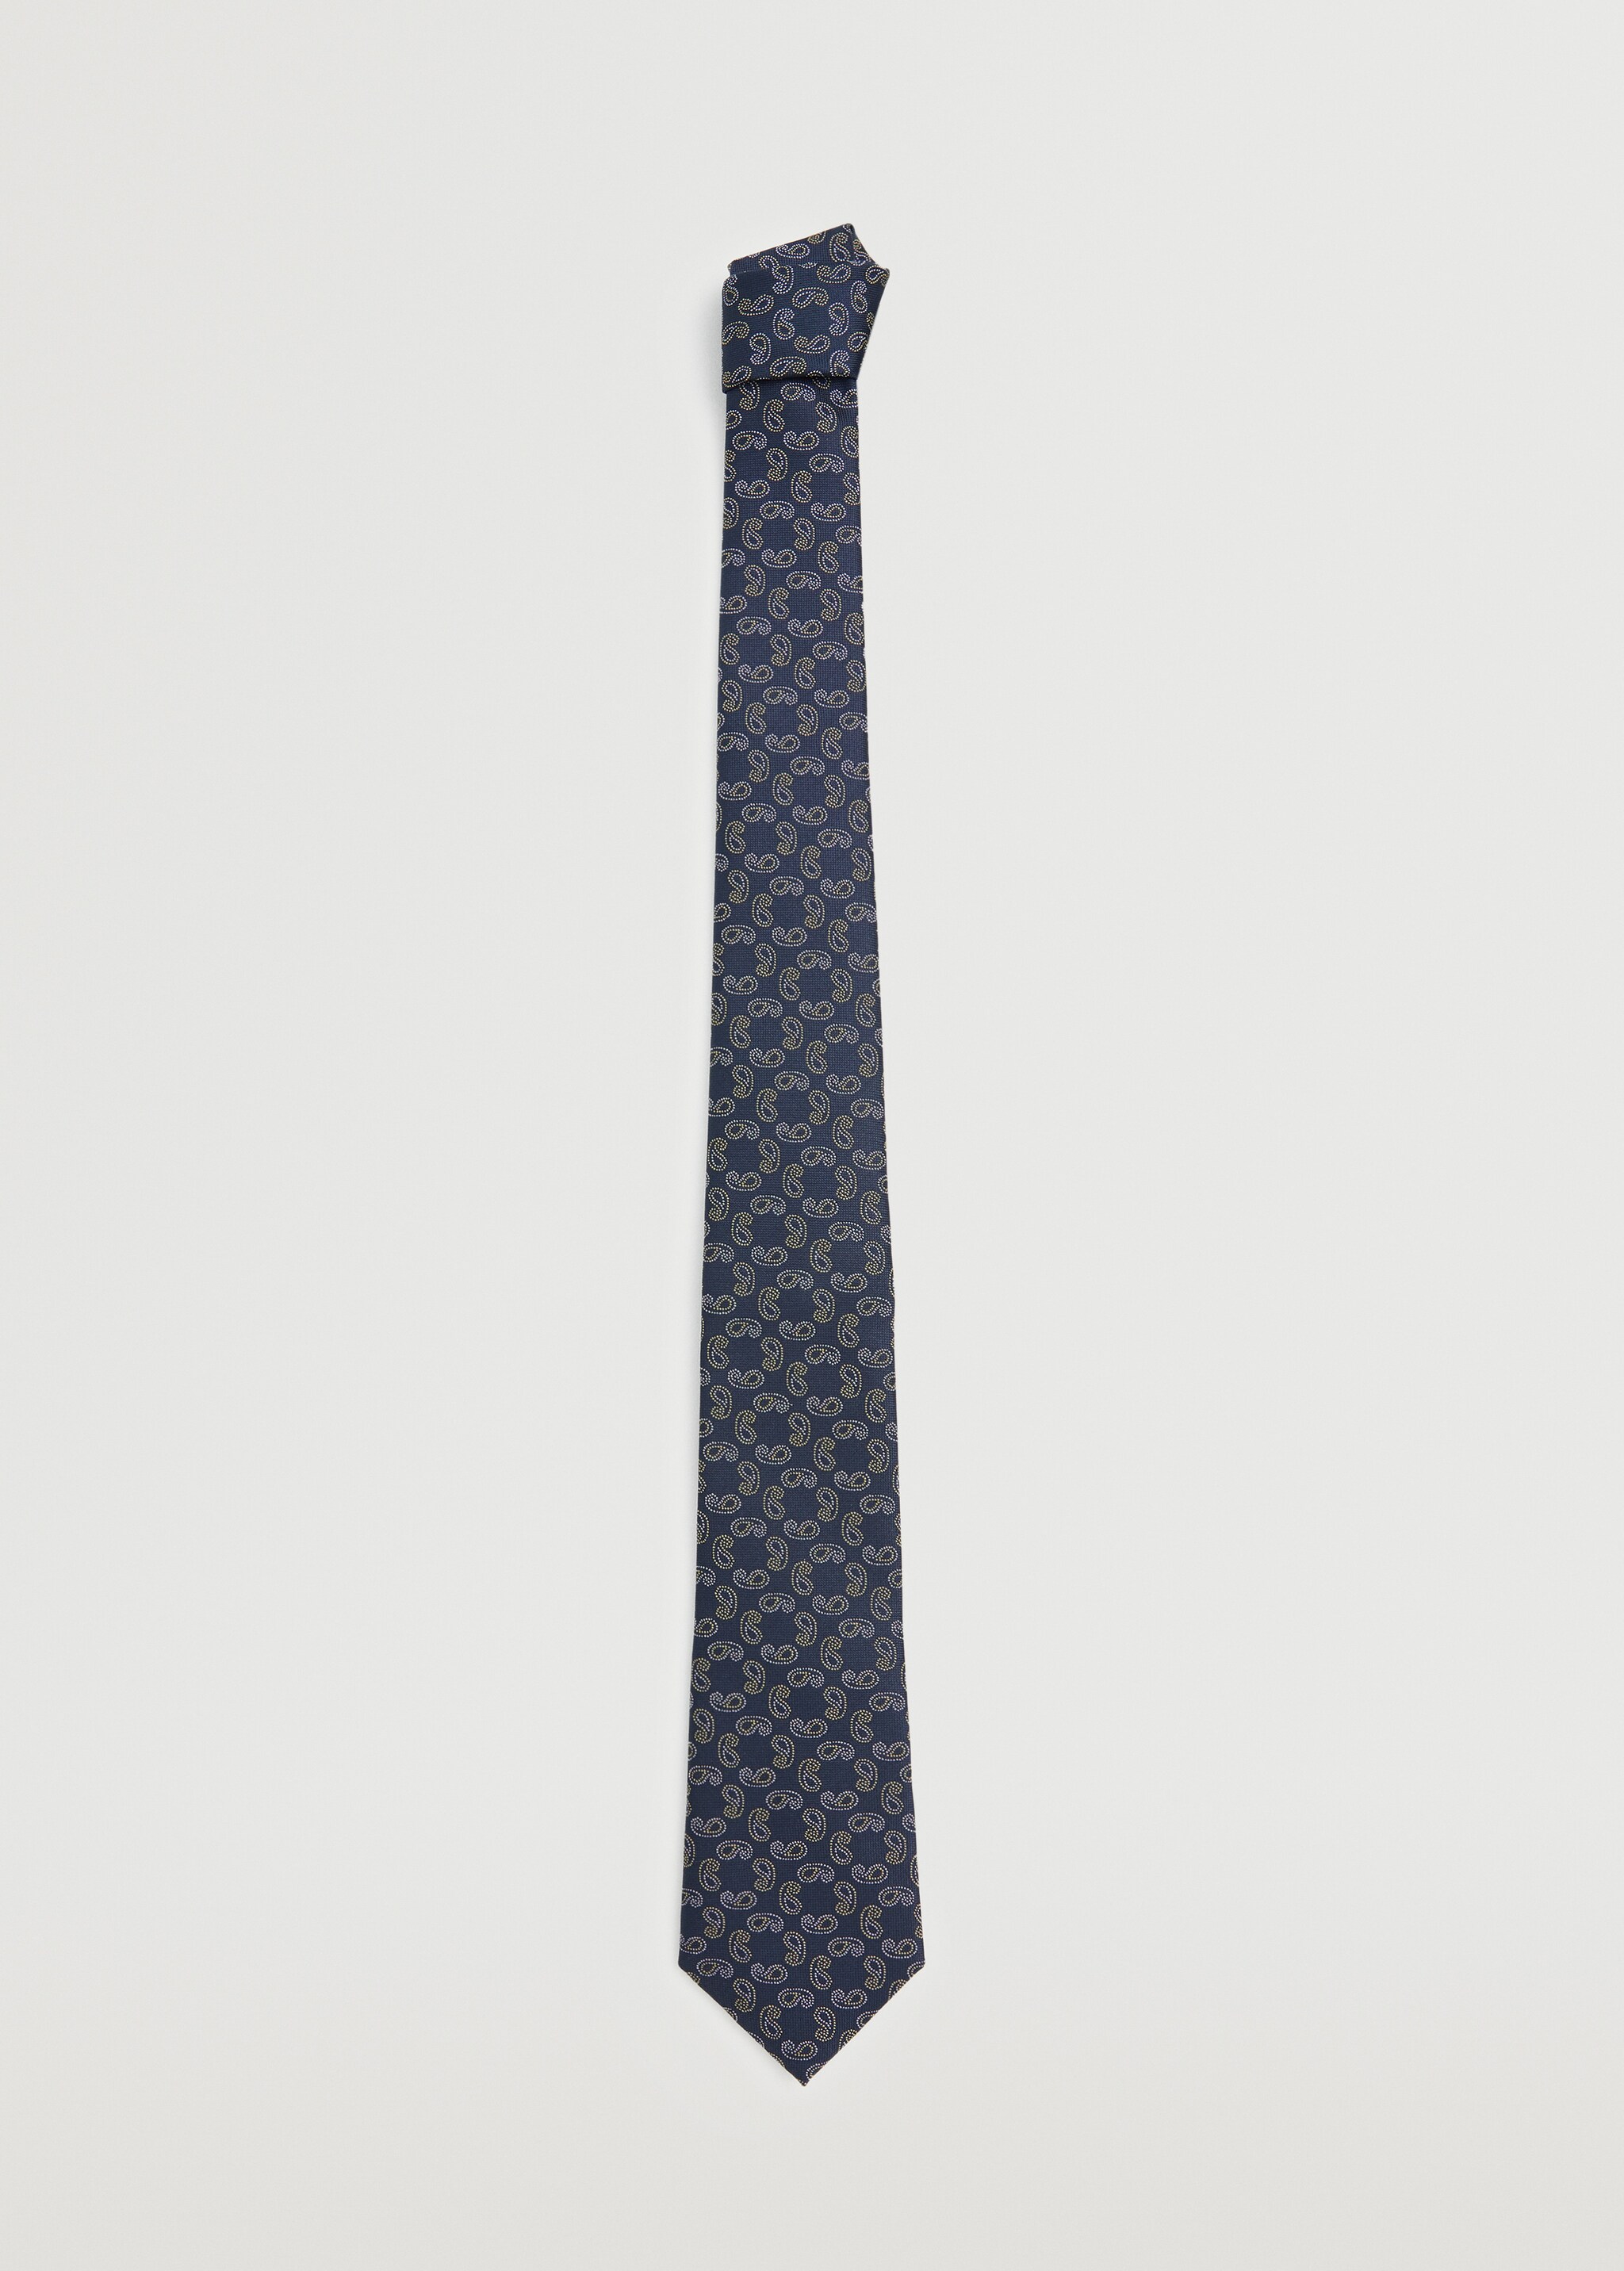 Paisley printed tie - Article without model